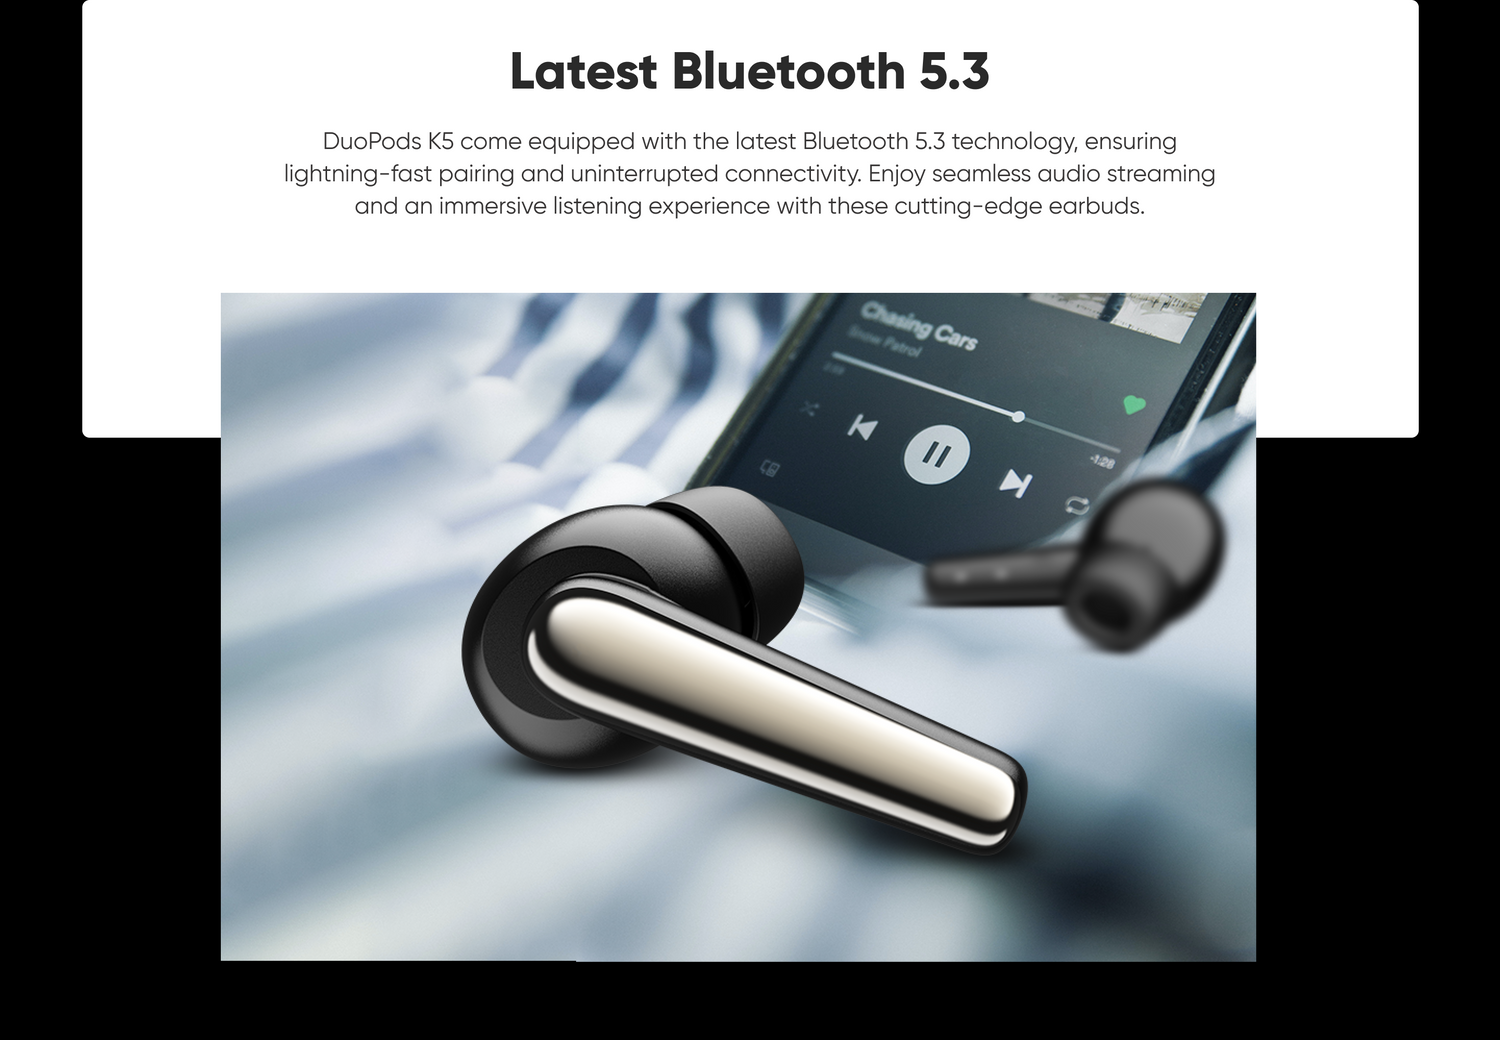 Latest Bluetooth 5.3, DuoPods K5 come equipped with the latest Bluetooth 5.3 technology, ensuring lightning-fast pairing and uninterrupted connectivity. Enjoy seamless audio streaming and an immersive listening experience with these cutting-edge earbuds.